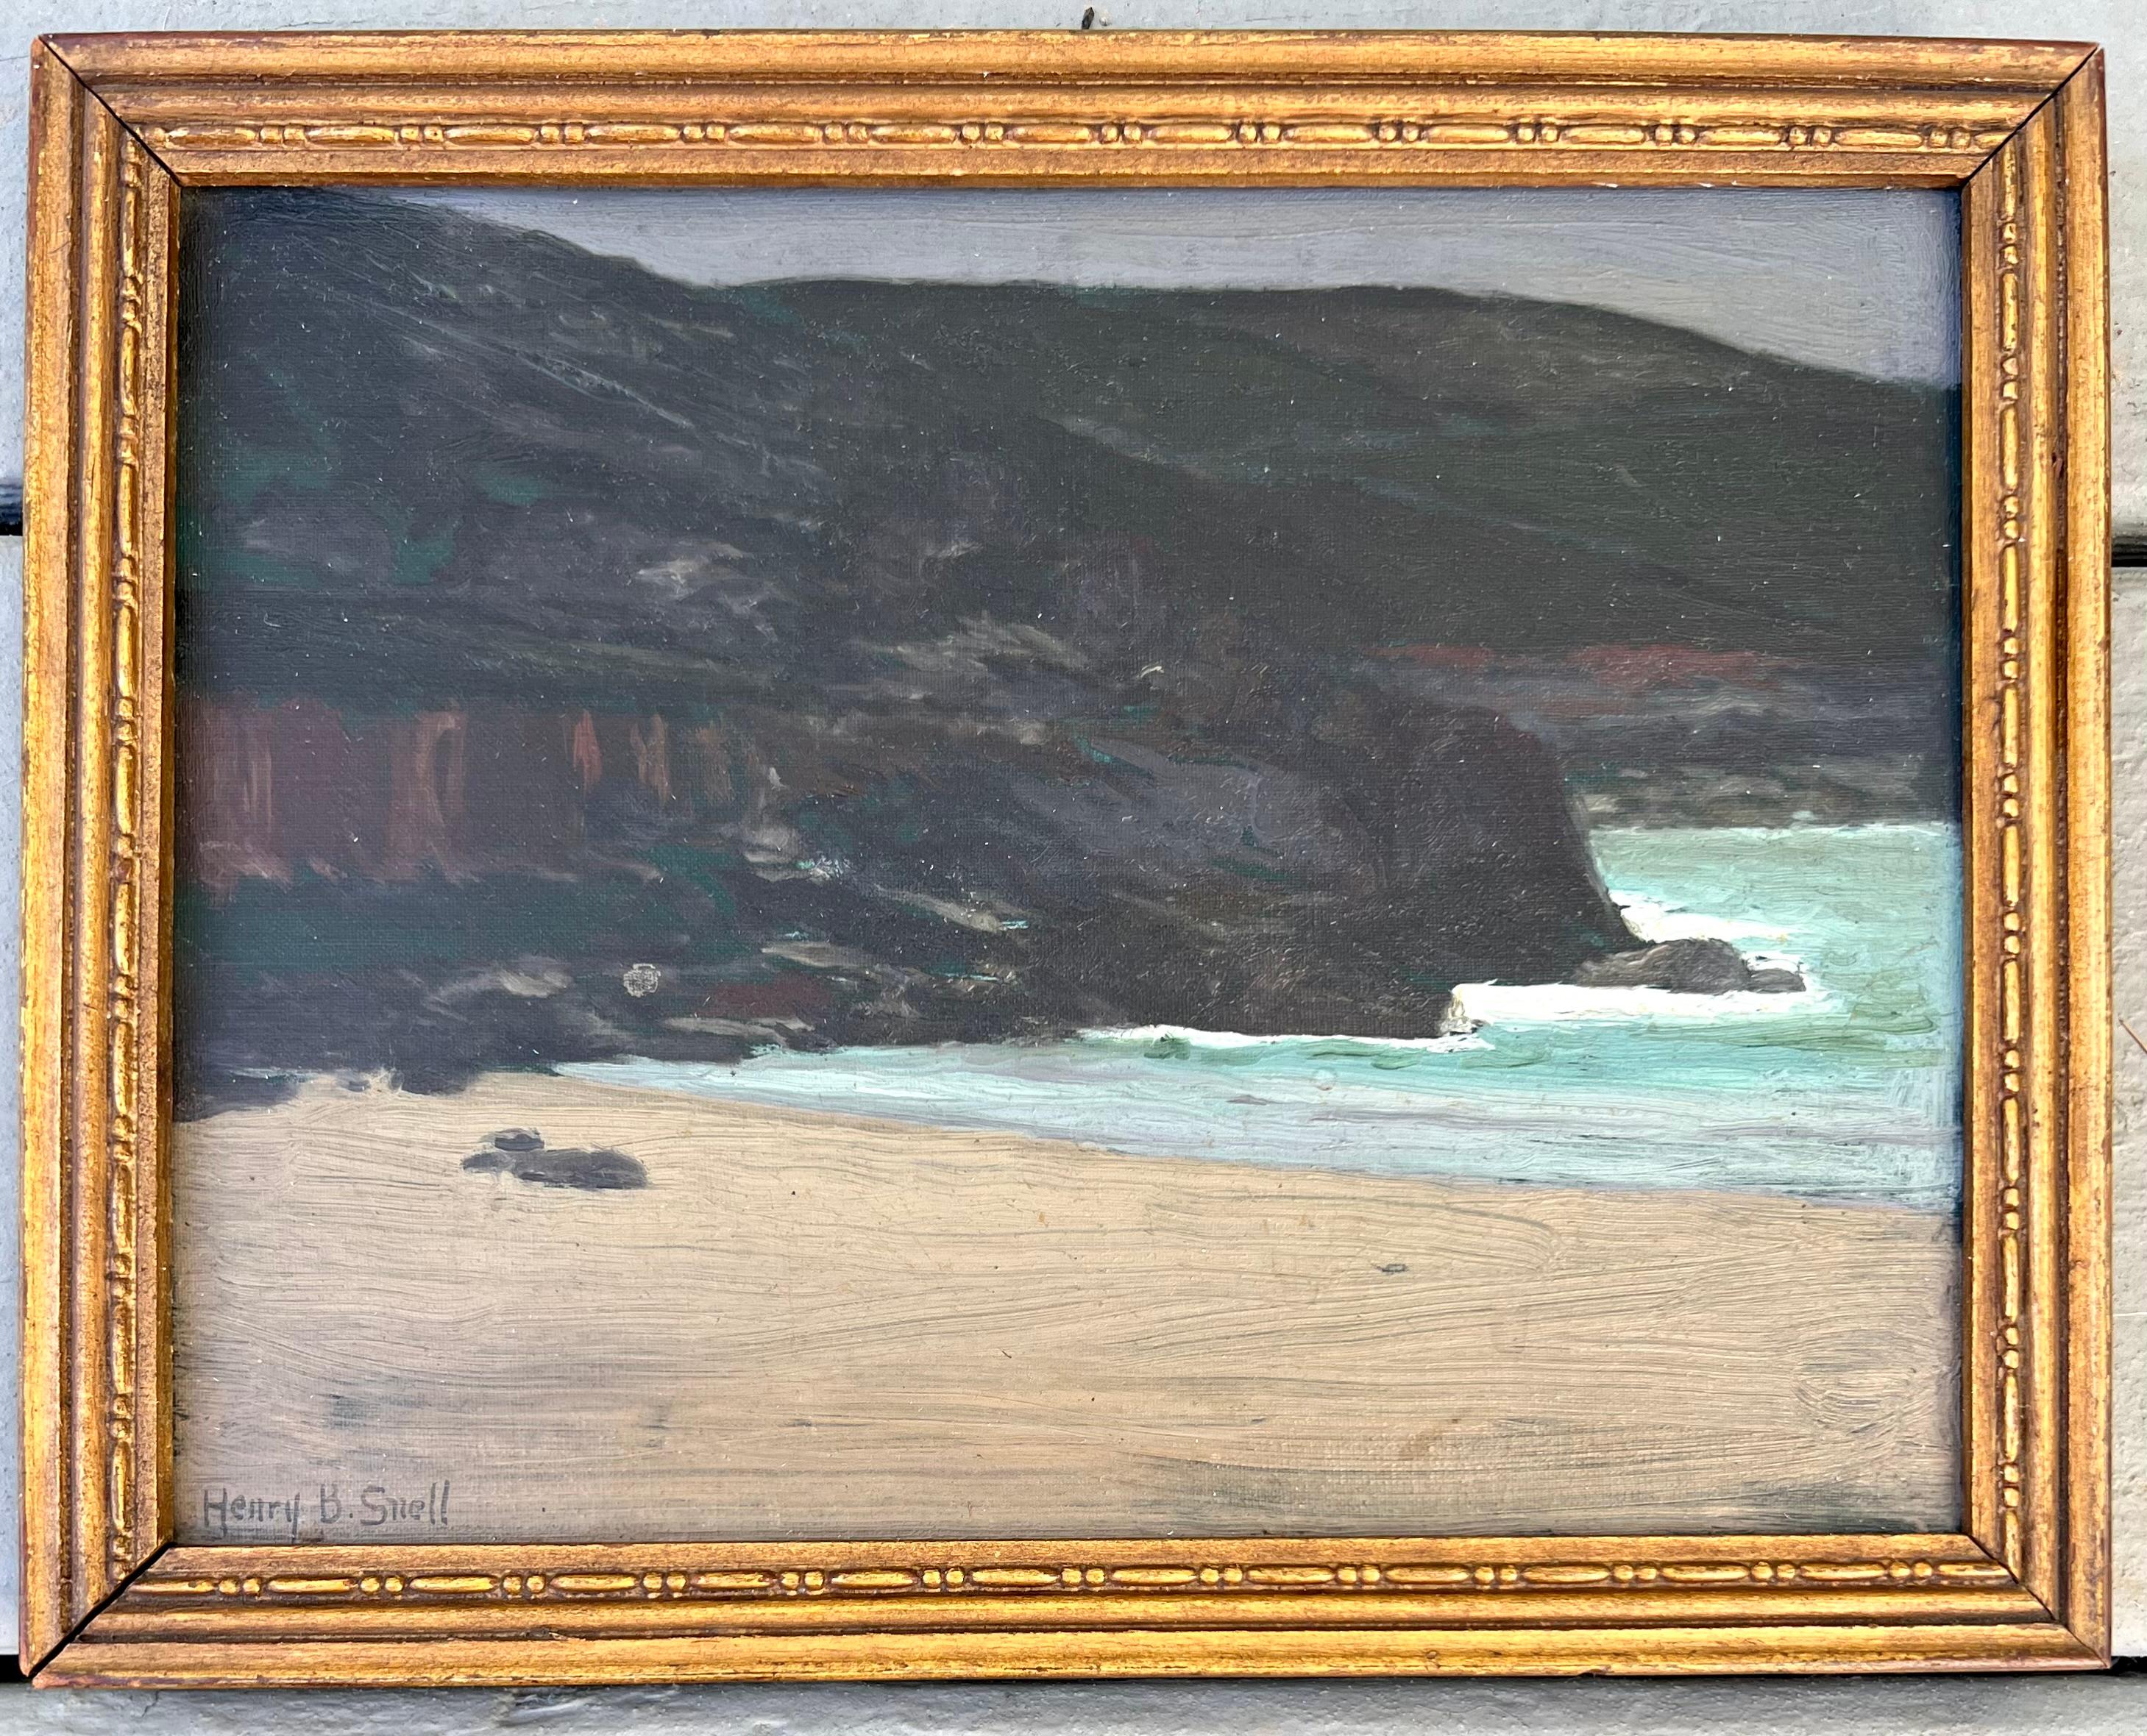 St Ives Beach - Painting by Henry Bayley Snell